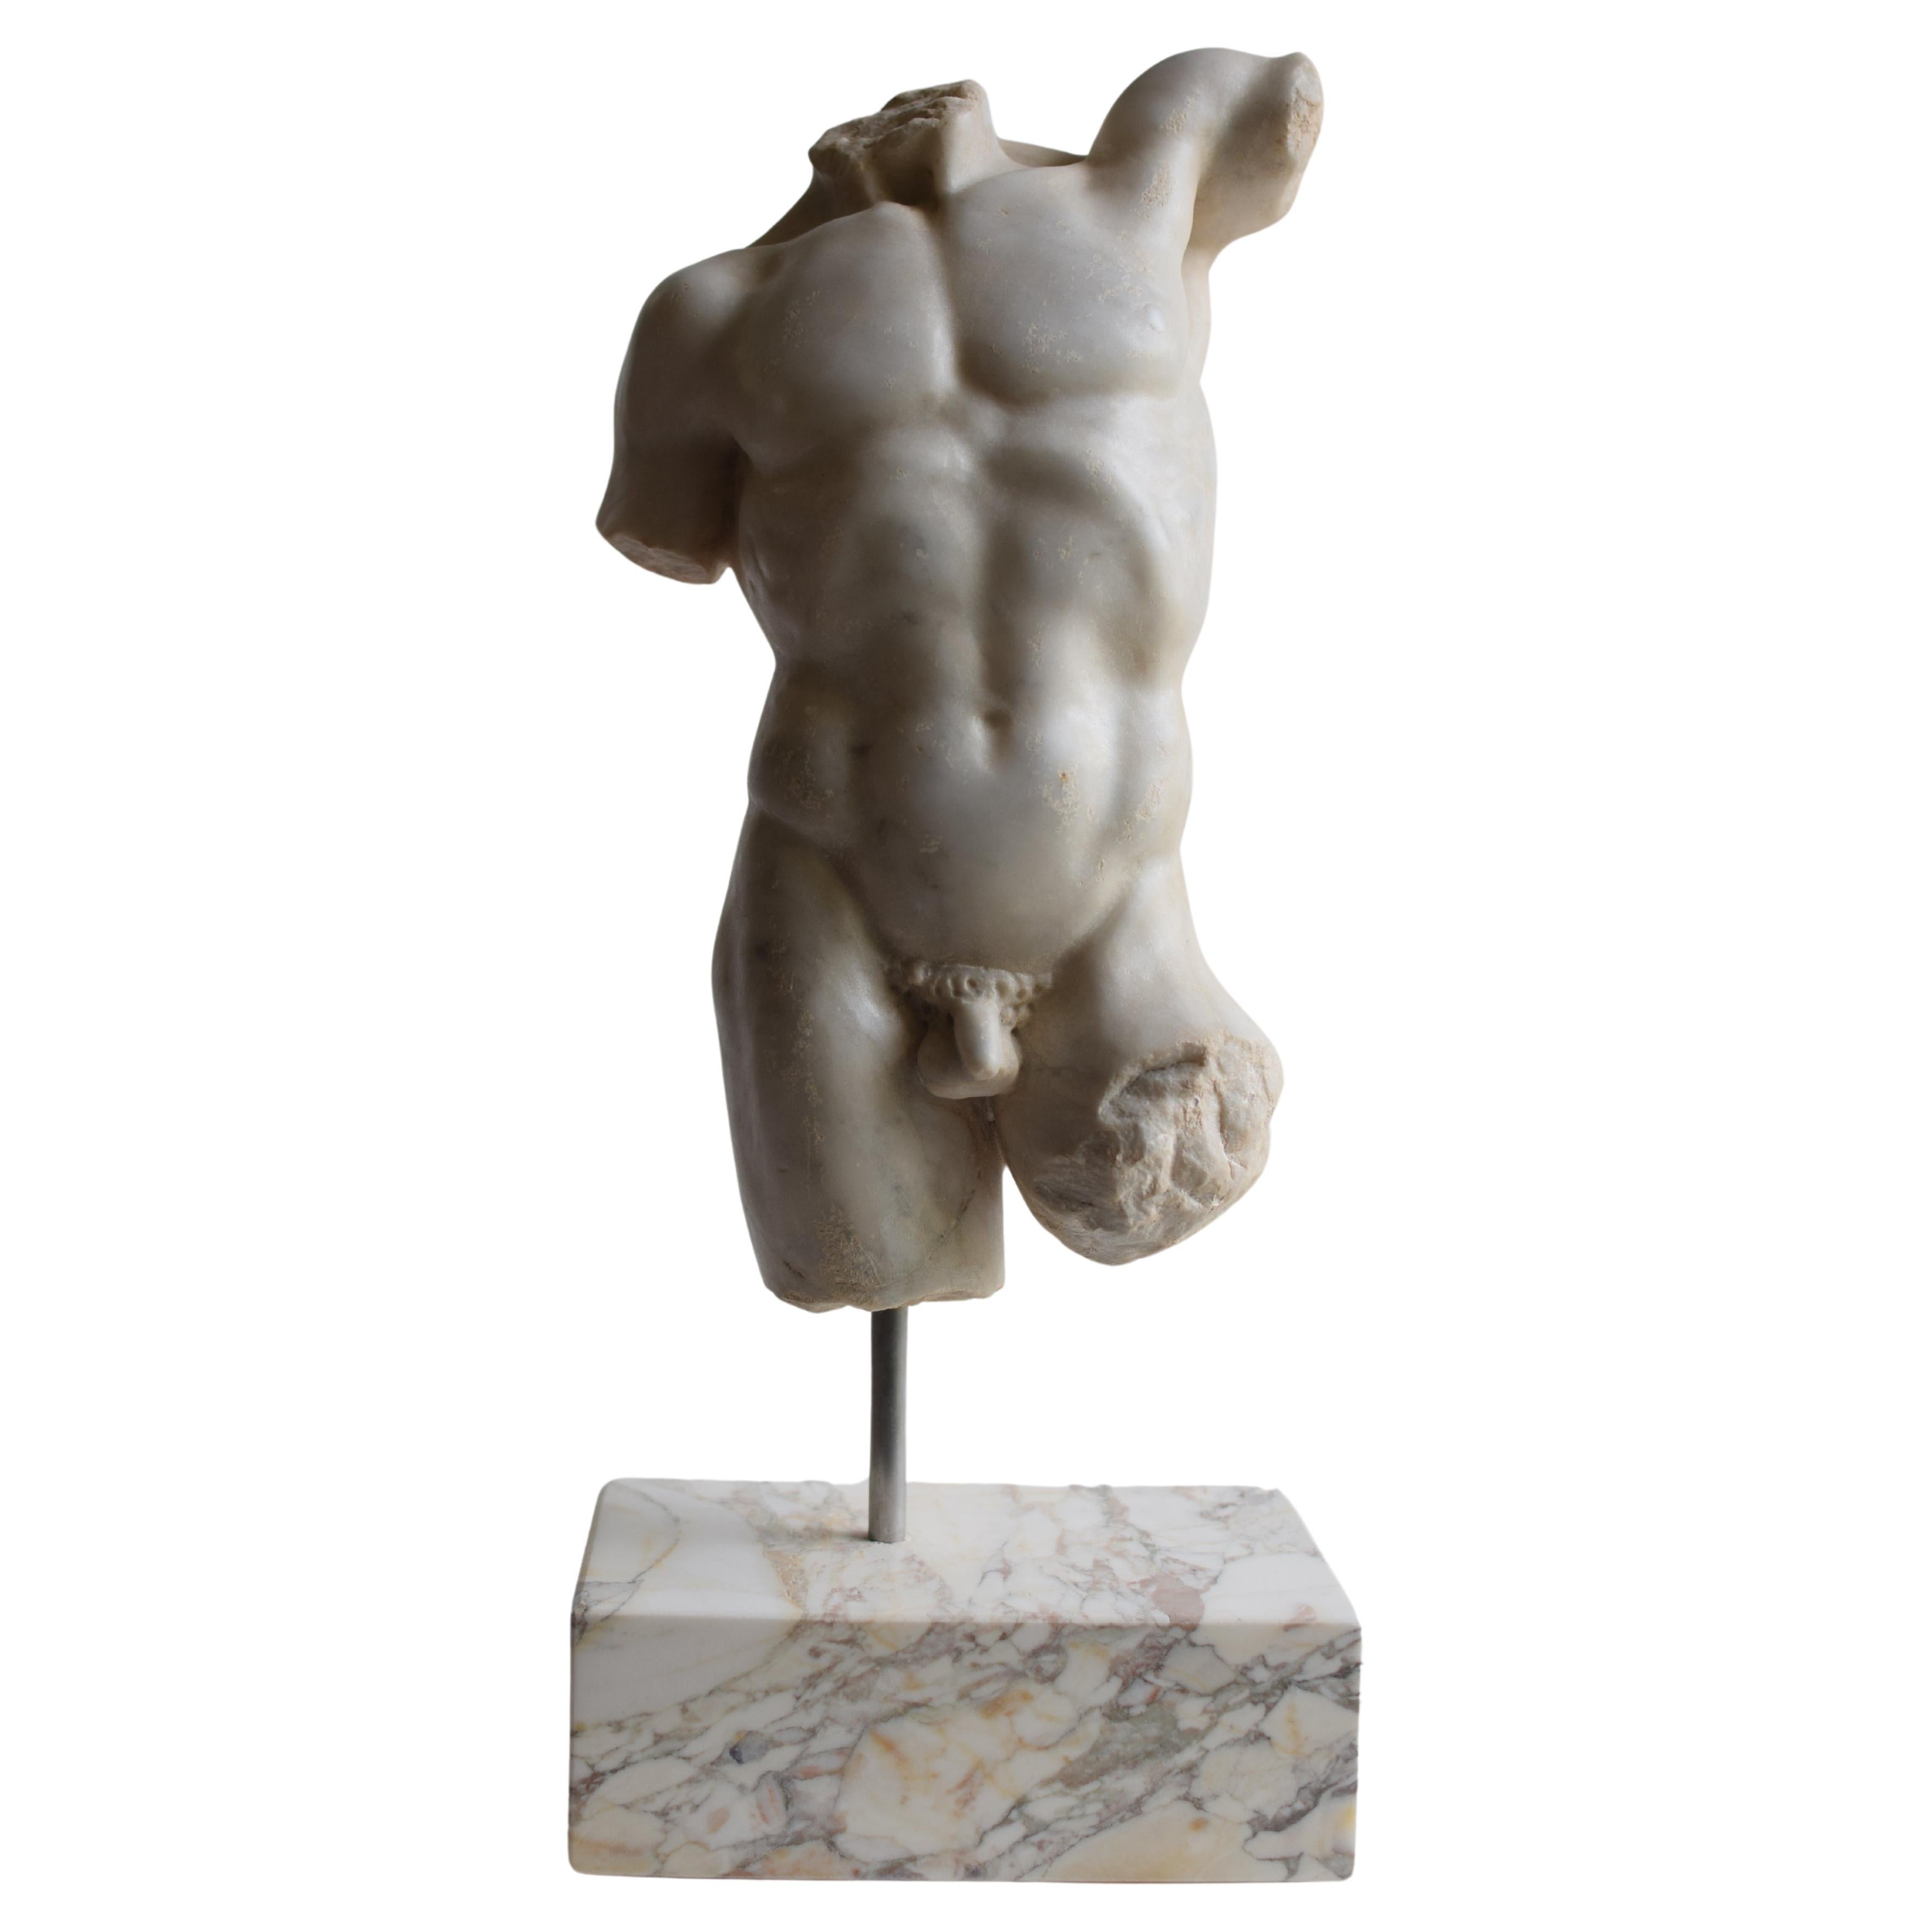 What is the difference between casting and carving in sculpture?